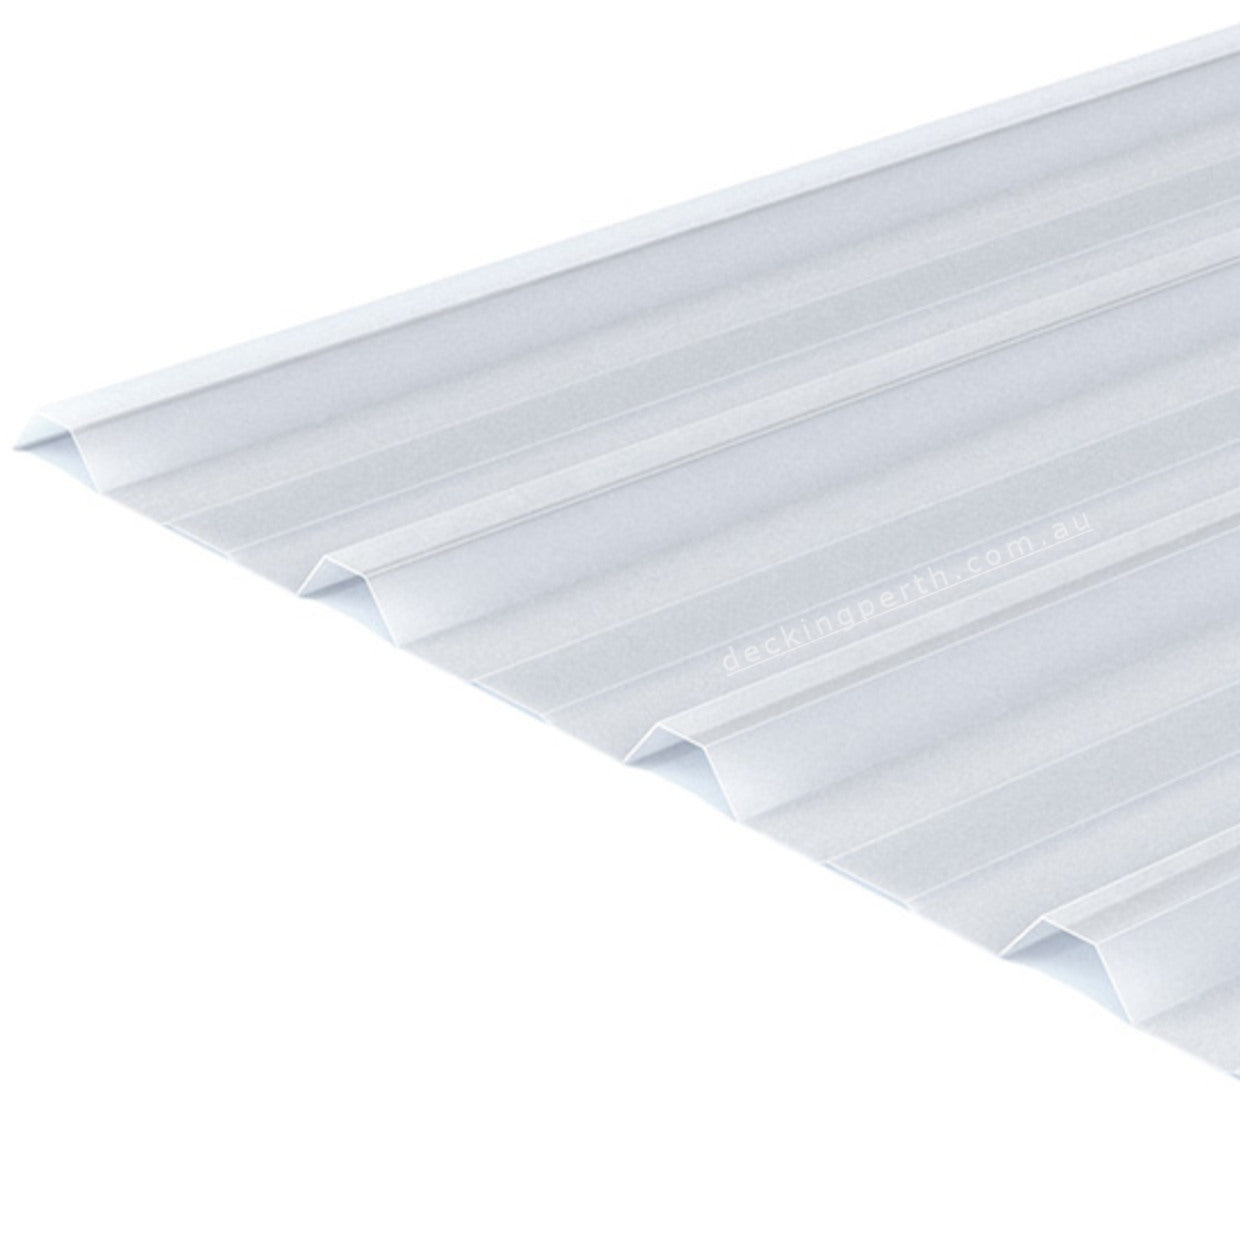 SUNSKY_Industrial_White_Diffused_polycarbonate_sheeting_Decking_Perth